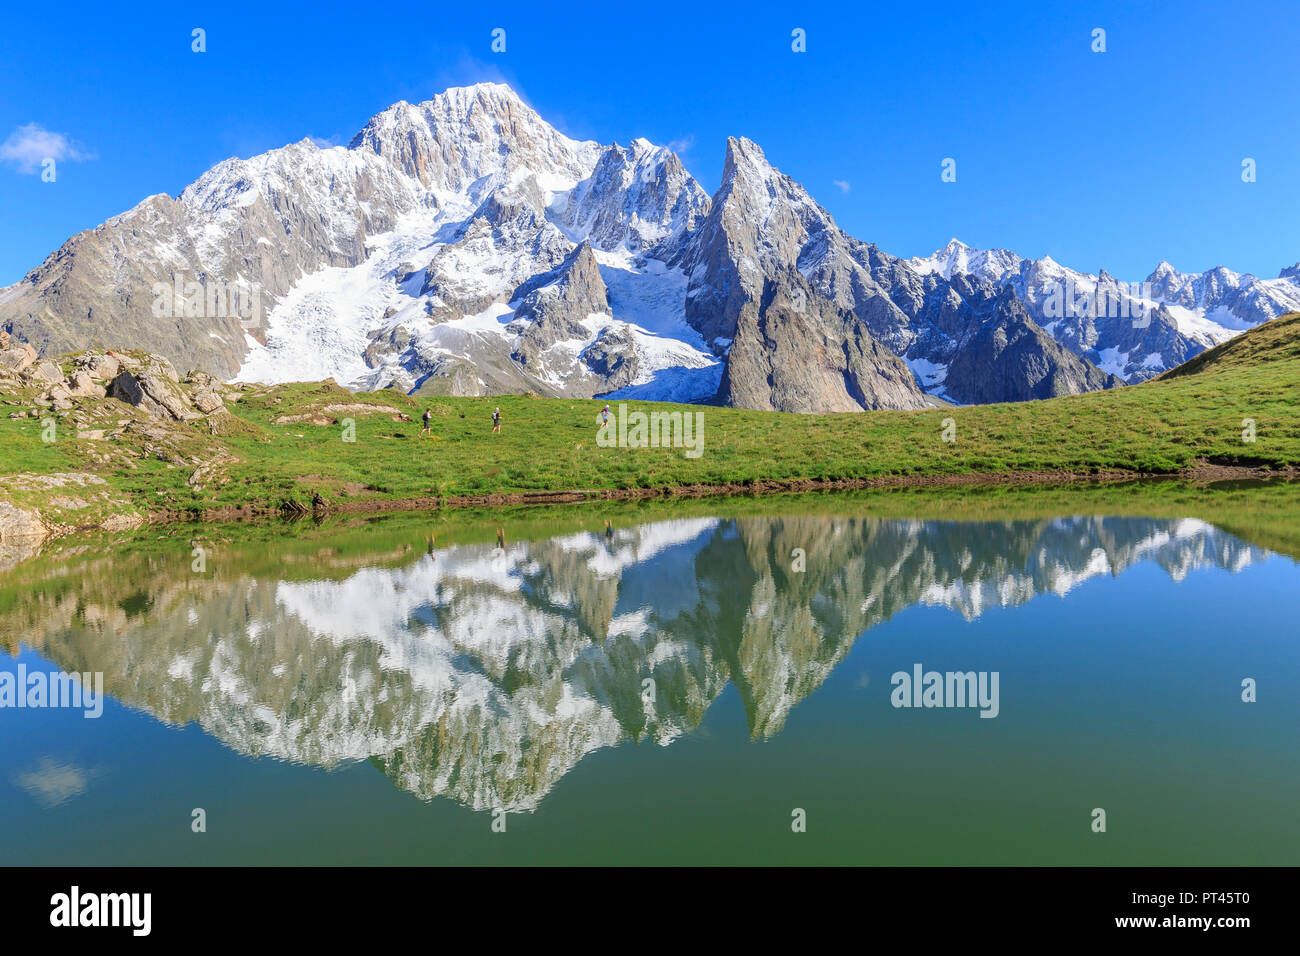 Trailrunner im Transit am Lac des Vesses Vesses, See, Veny Tal, Courmayeur, Aostatal, Italien, Europa Stockfoto